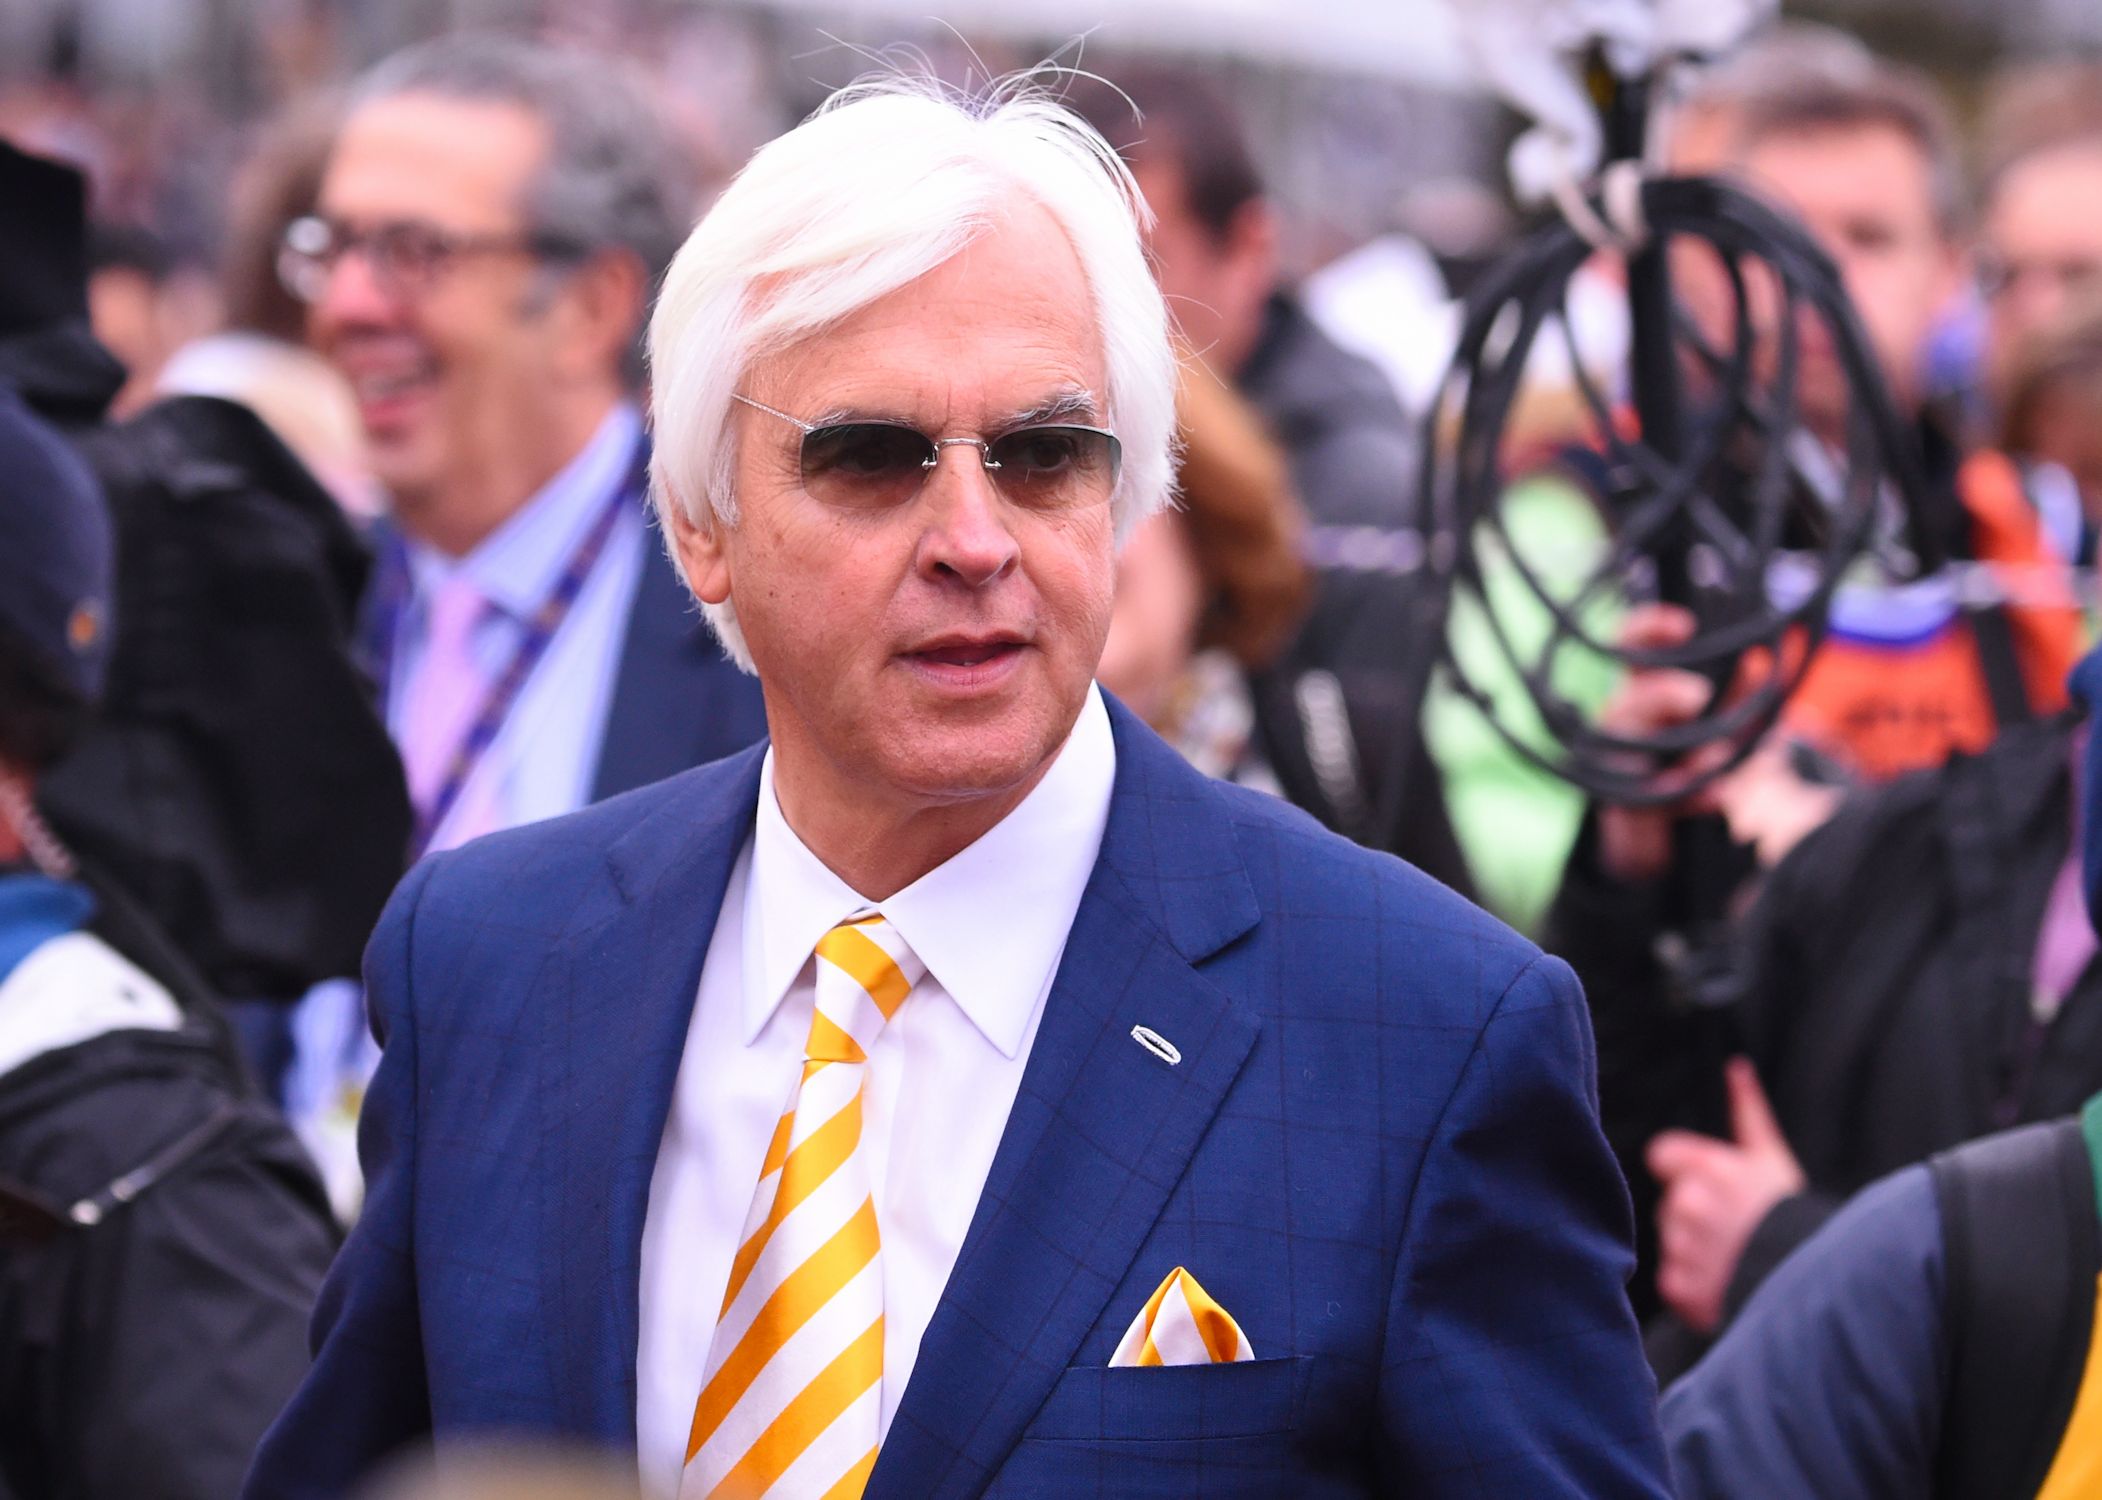 Bob Baffert at the 2015 Breeders' Cup at Keeneland (Eclipse Sportswire/Breeders' Cup)